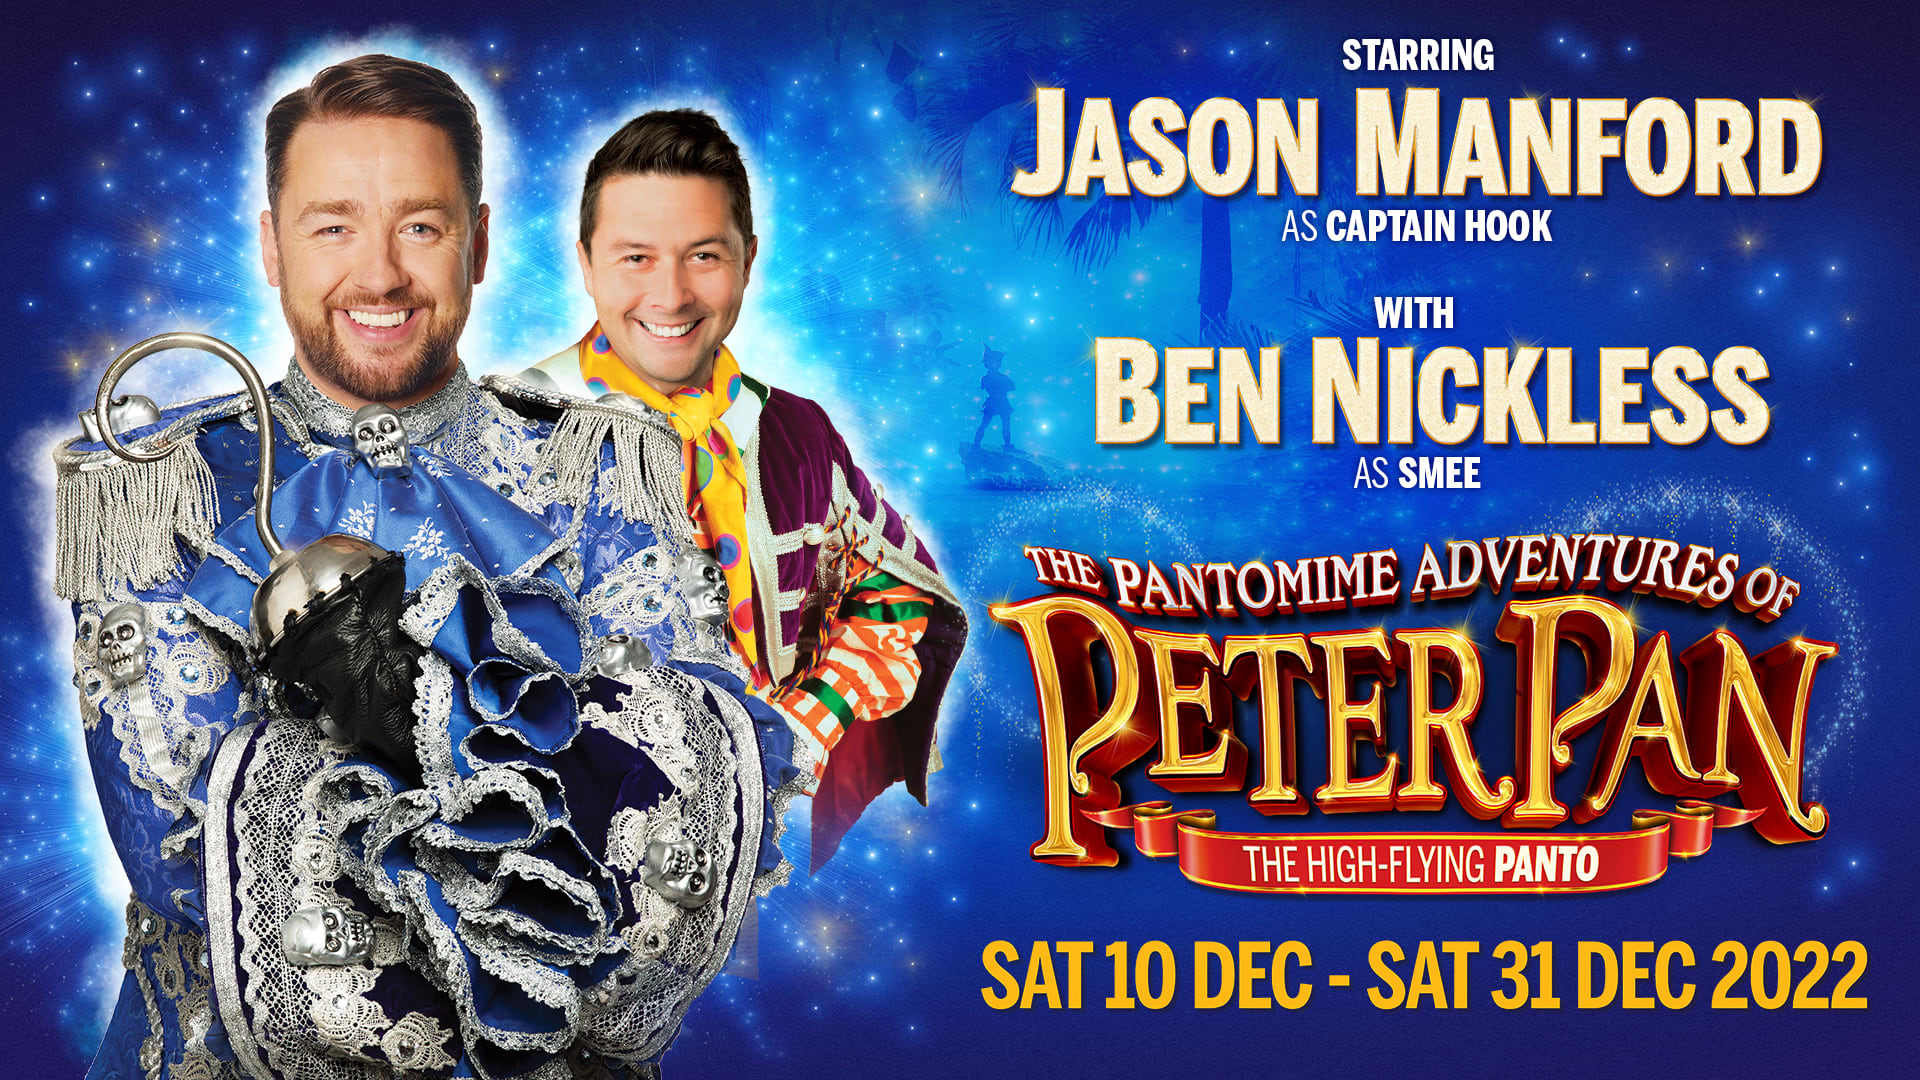 The Pantomime Adventures of Peter Pan Opera House Manchester